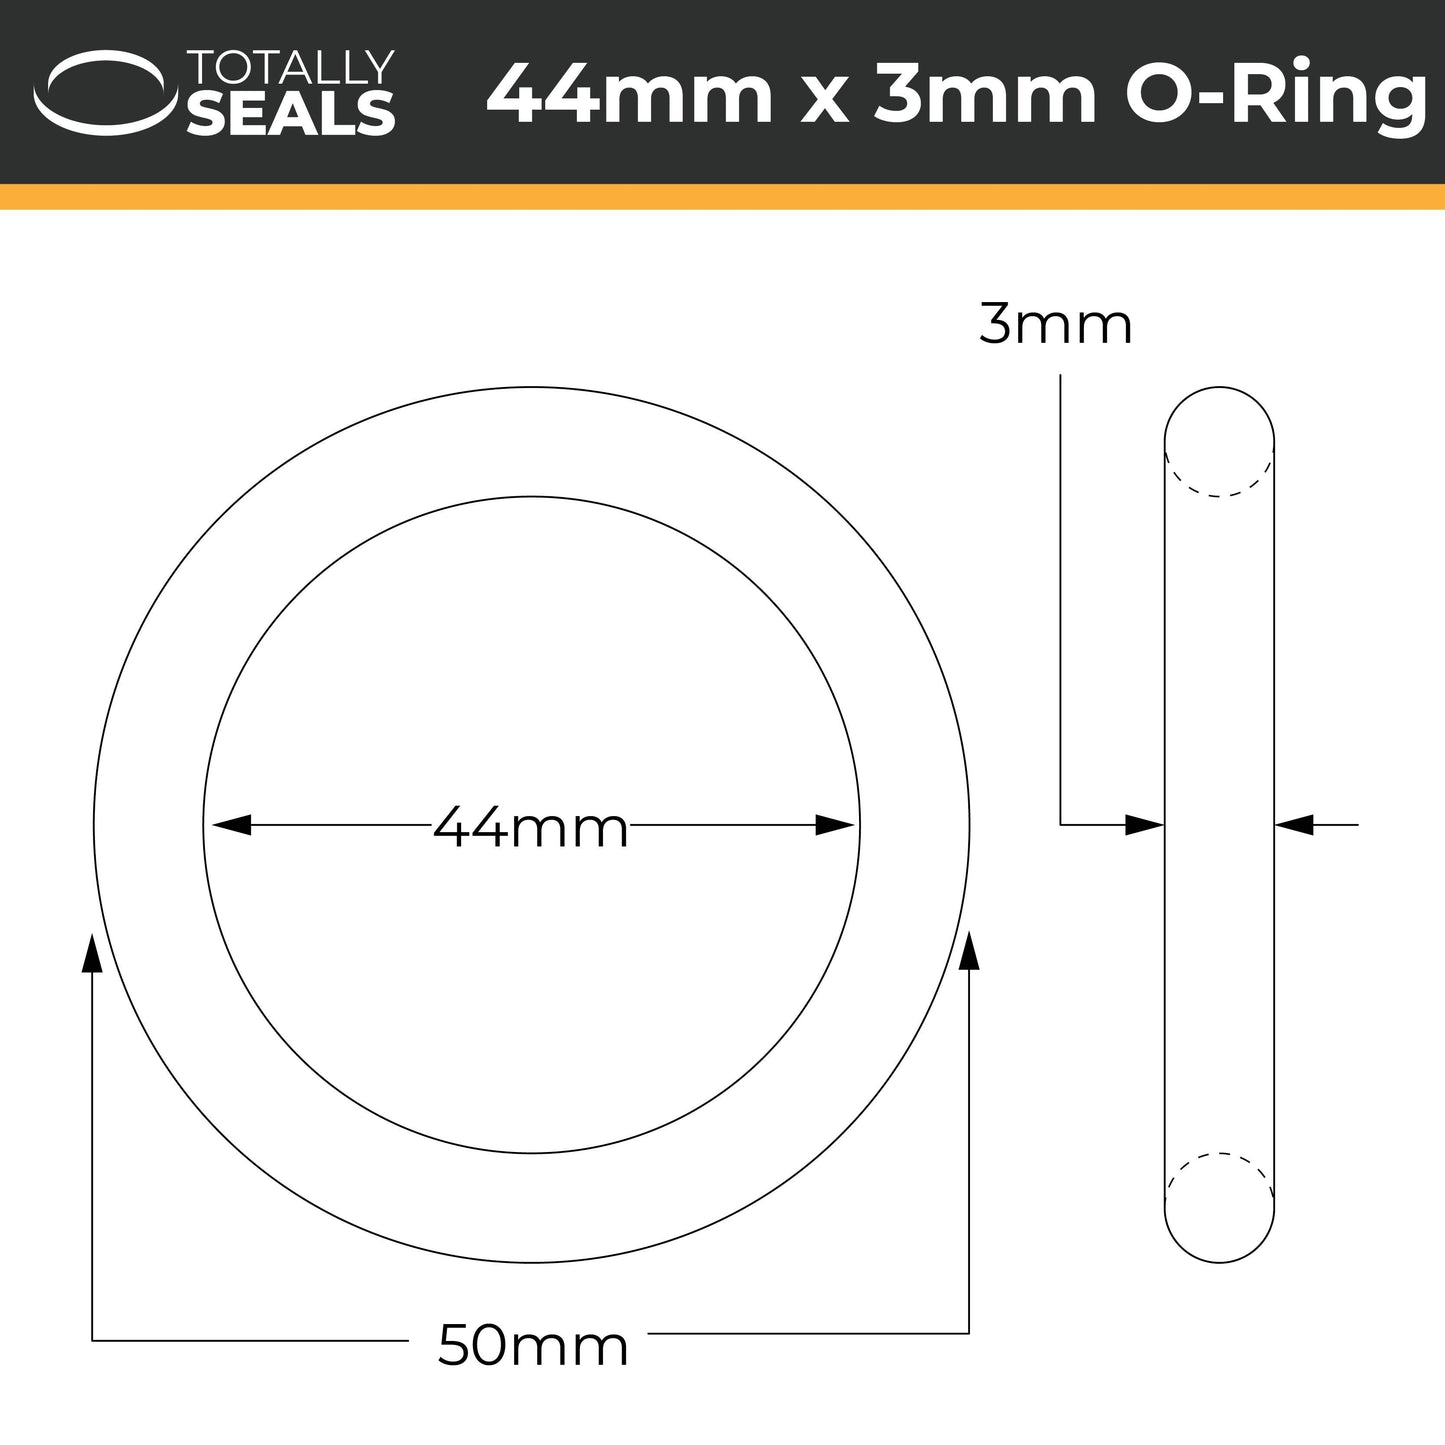 44mm x 3mm (50mm OD) Nitrile O-Rings - Totally Seals®